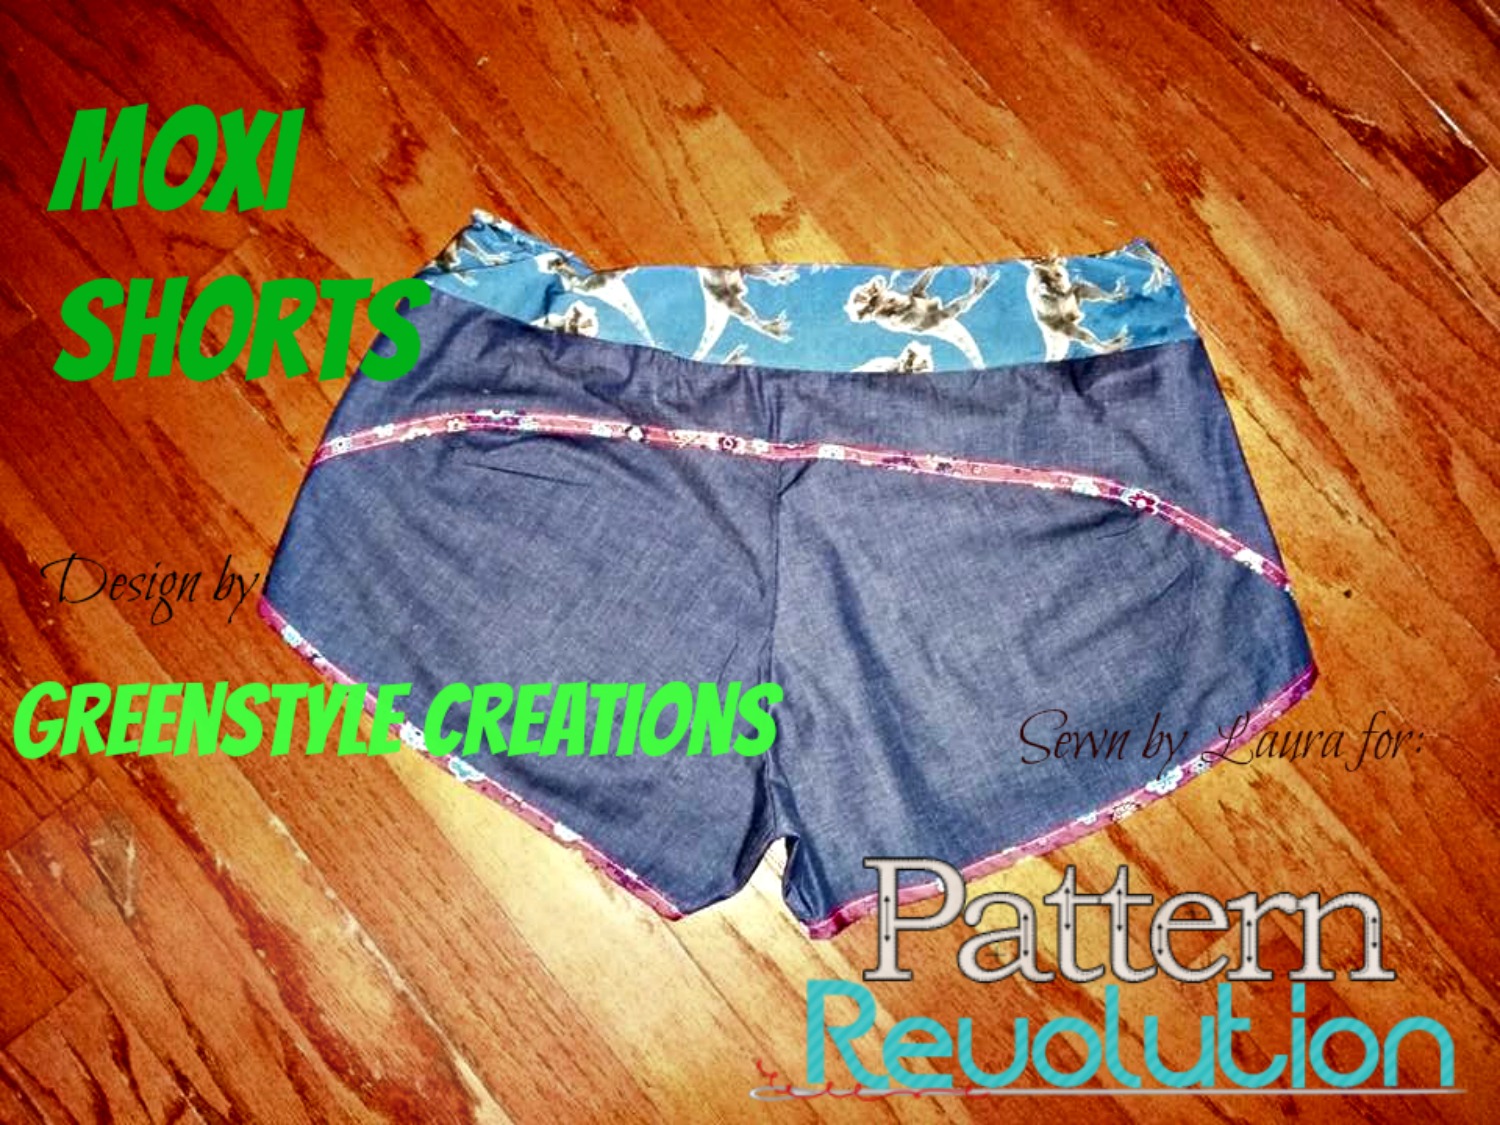 Moxi Shorts by Greenstyle Creations — Pattern Revolution